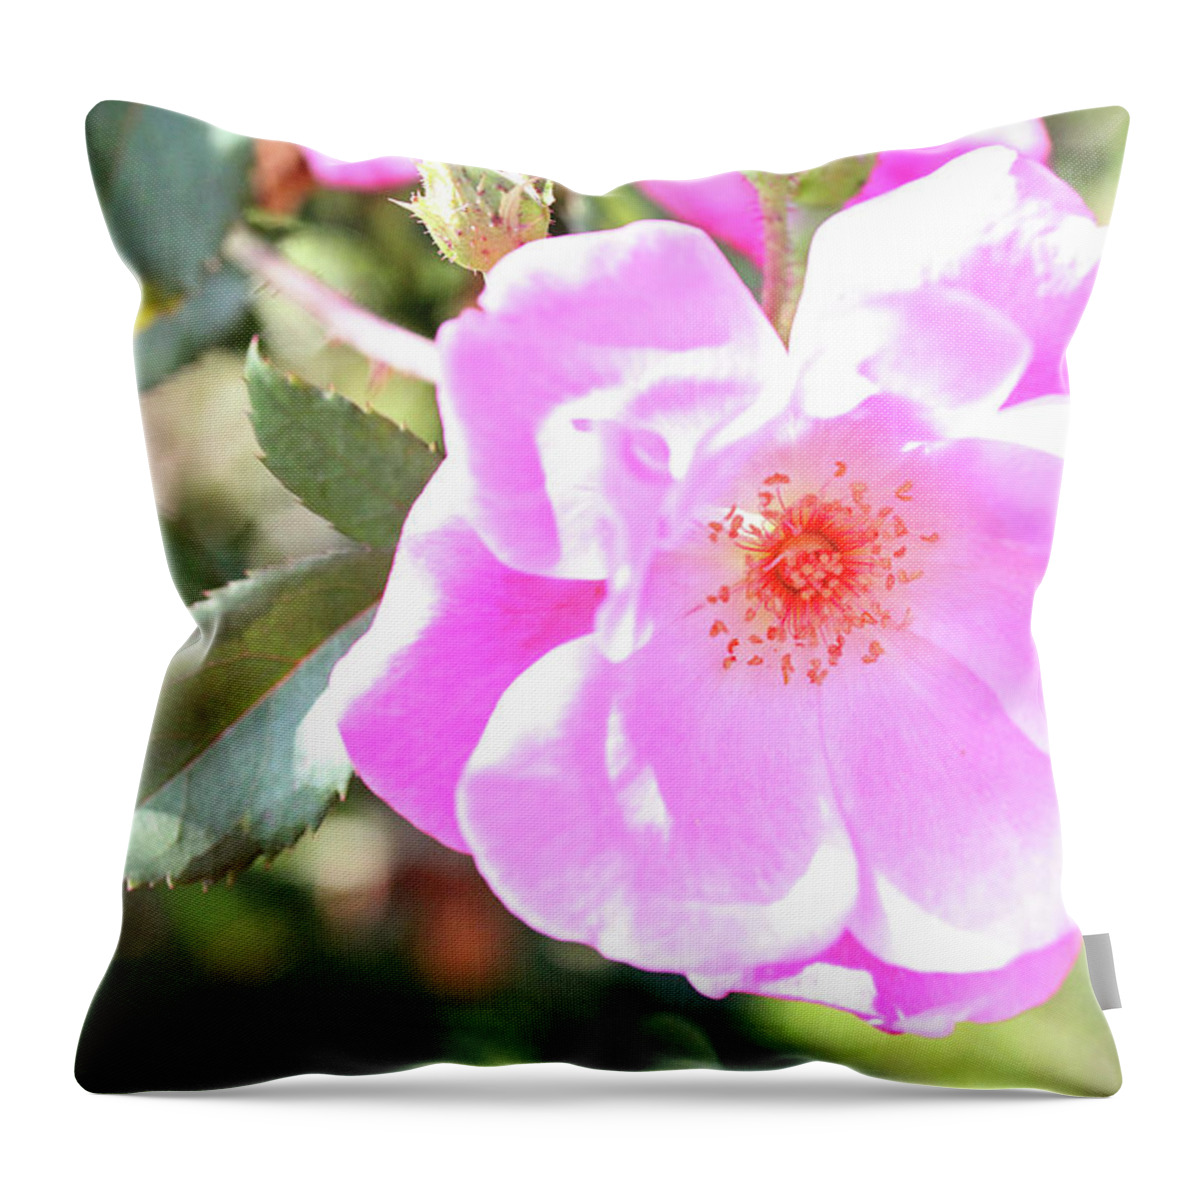 Flowers Throw Pillow featuring the photograph Pretty Pink Rose by Trina Ansel